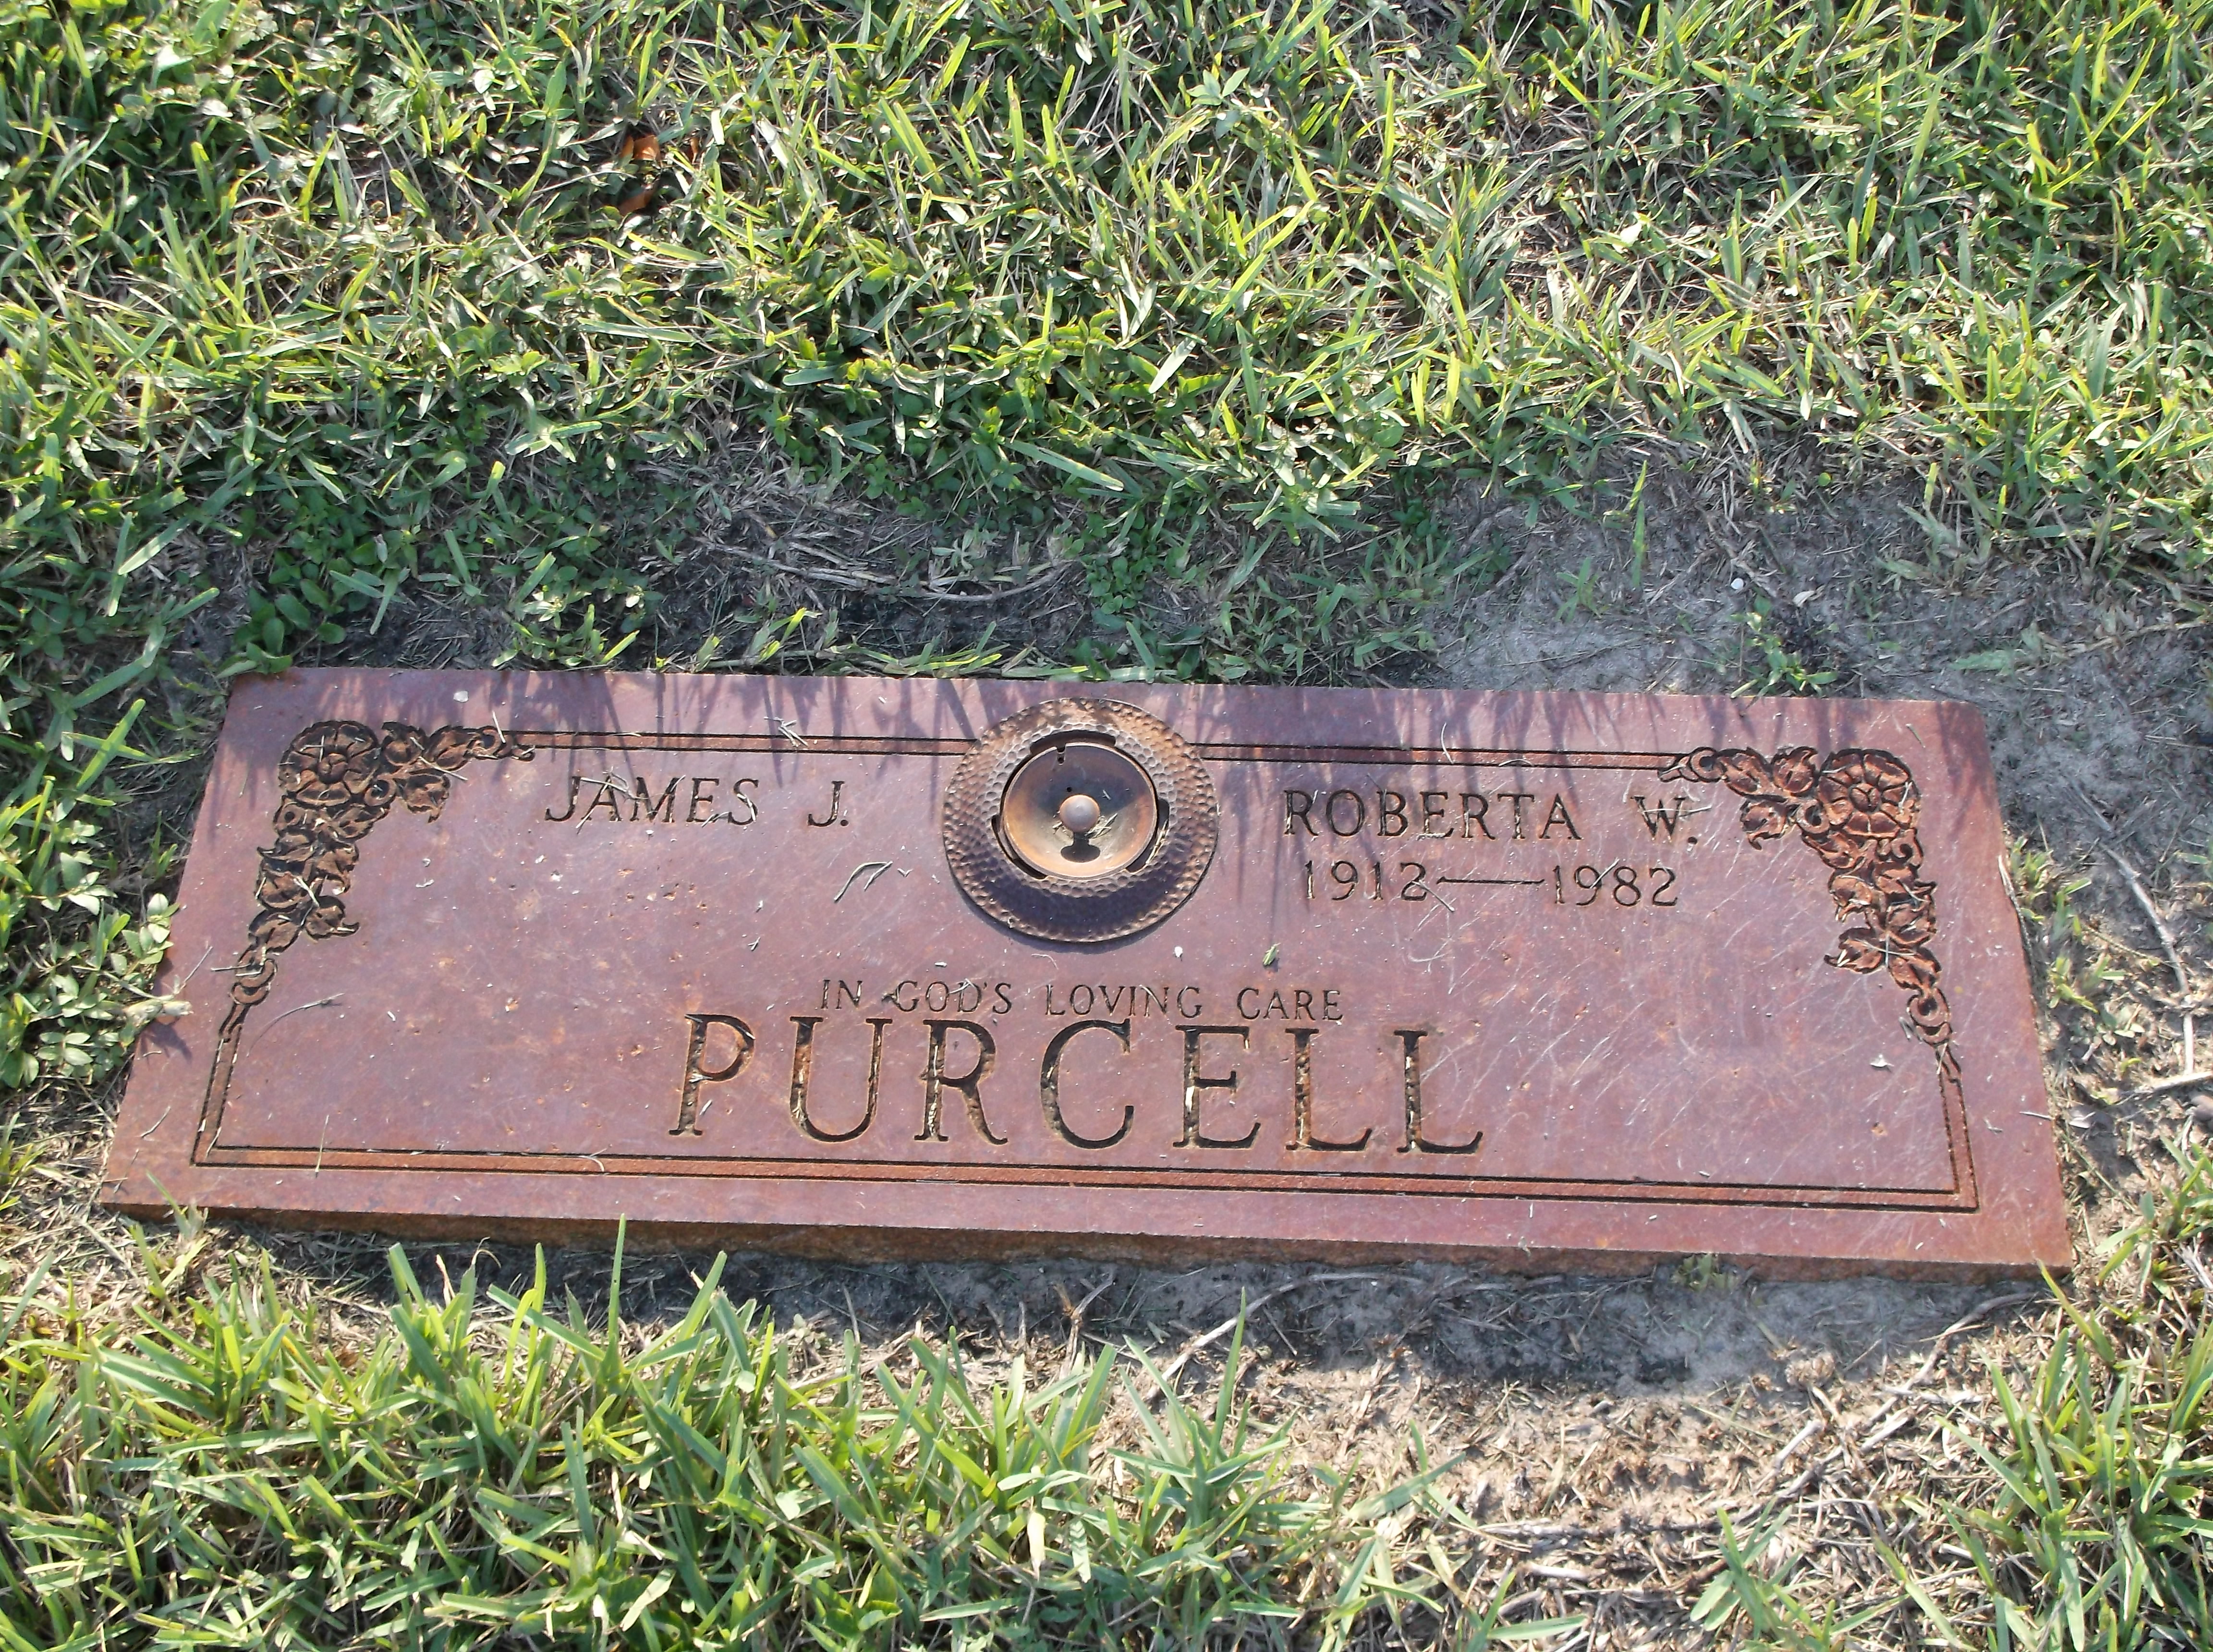 James J Purcell